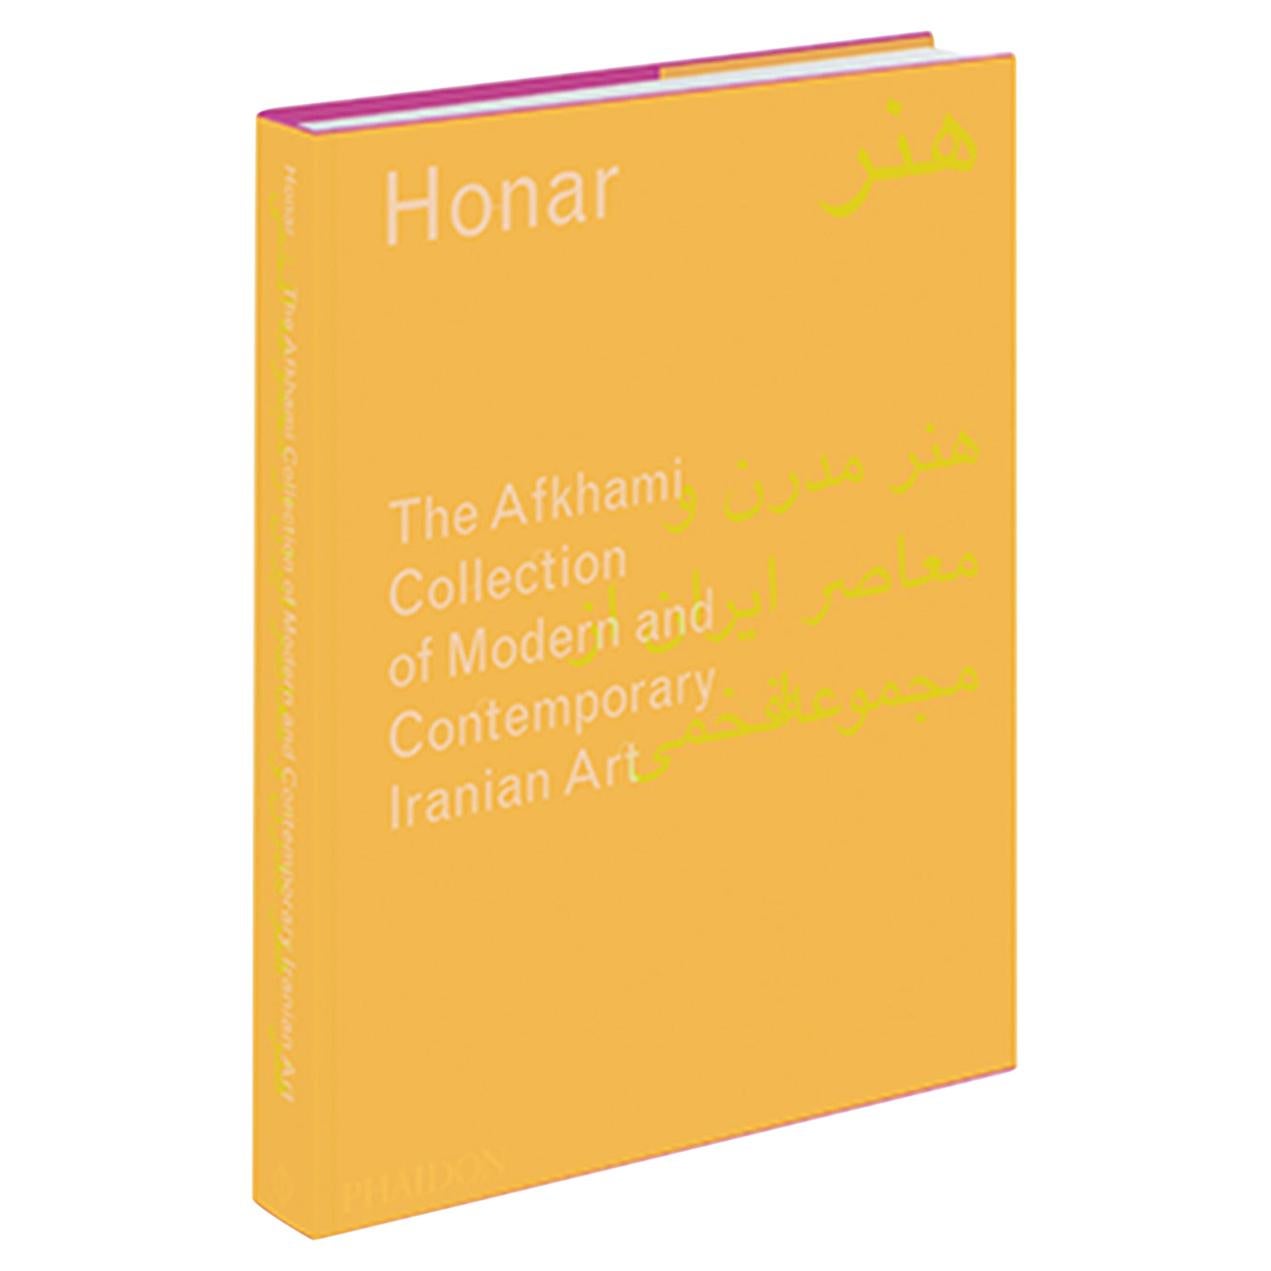 Honar - The Afkhami Collection of Modern and Contemporary Iranian Art